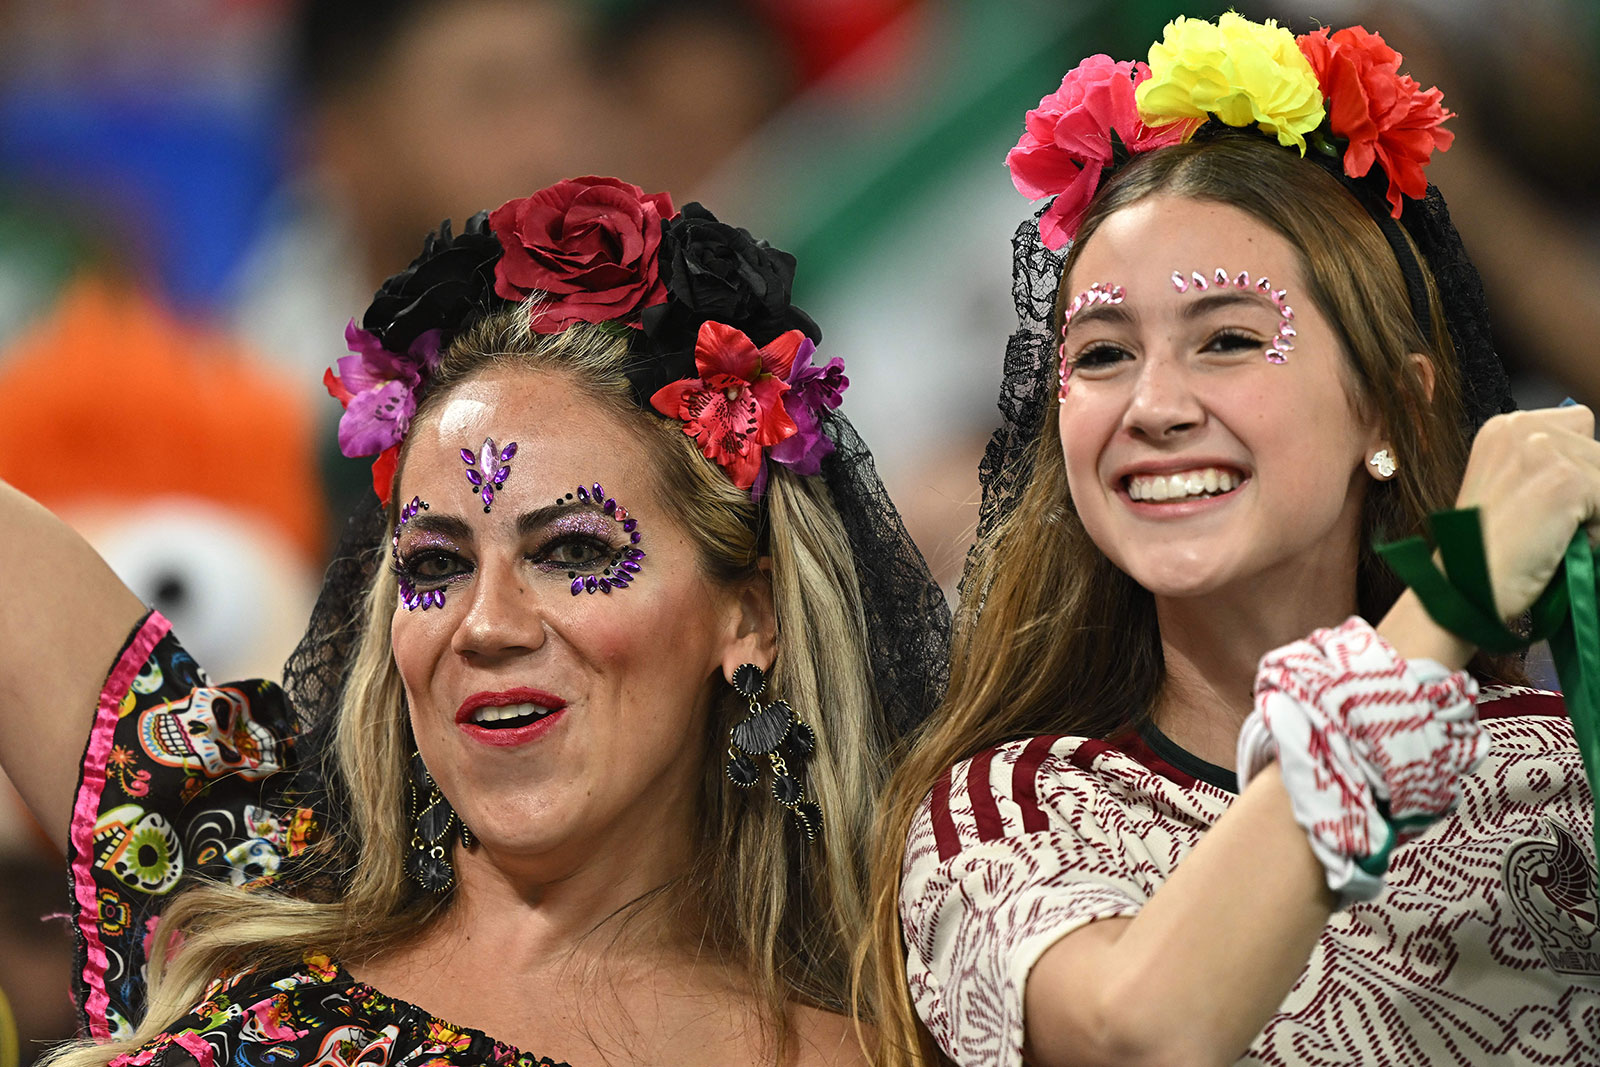 Fans cheer in the stands ahead of the match between Mexico and Poland on November 22.